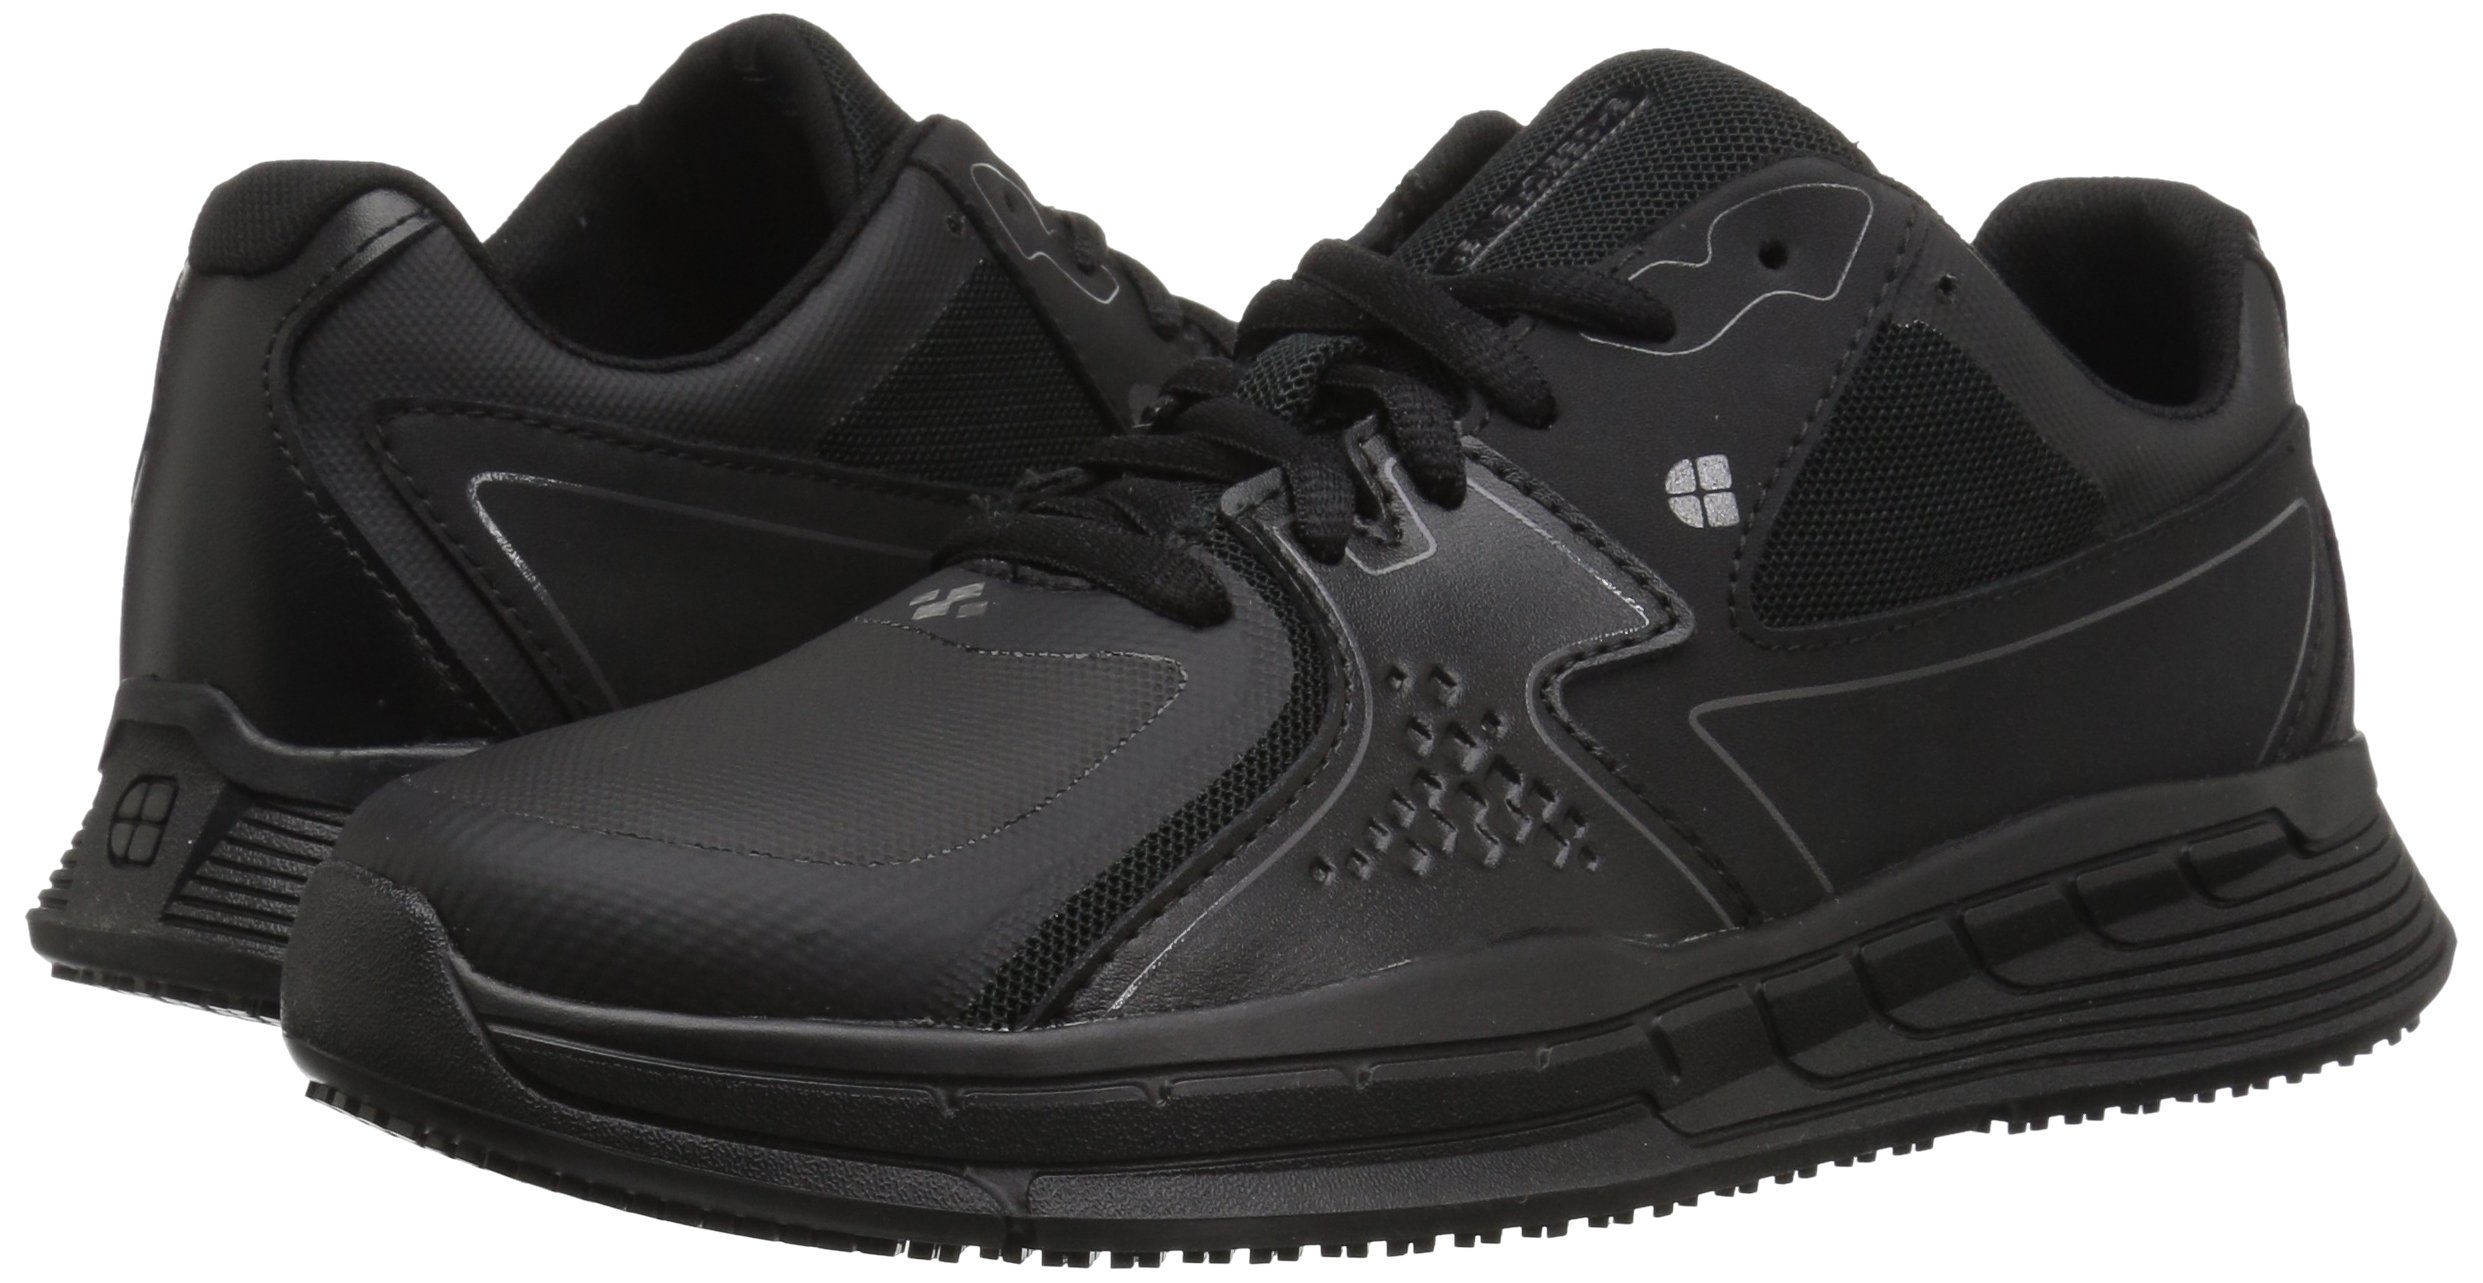 Shoes for Crews Condor and Condor II Men's Work Shoes, Slip Resistant, Water Resistant, Black, Multiple Size Options